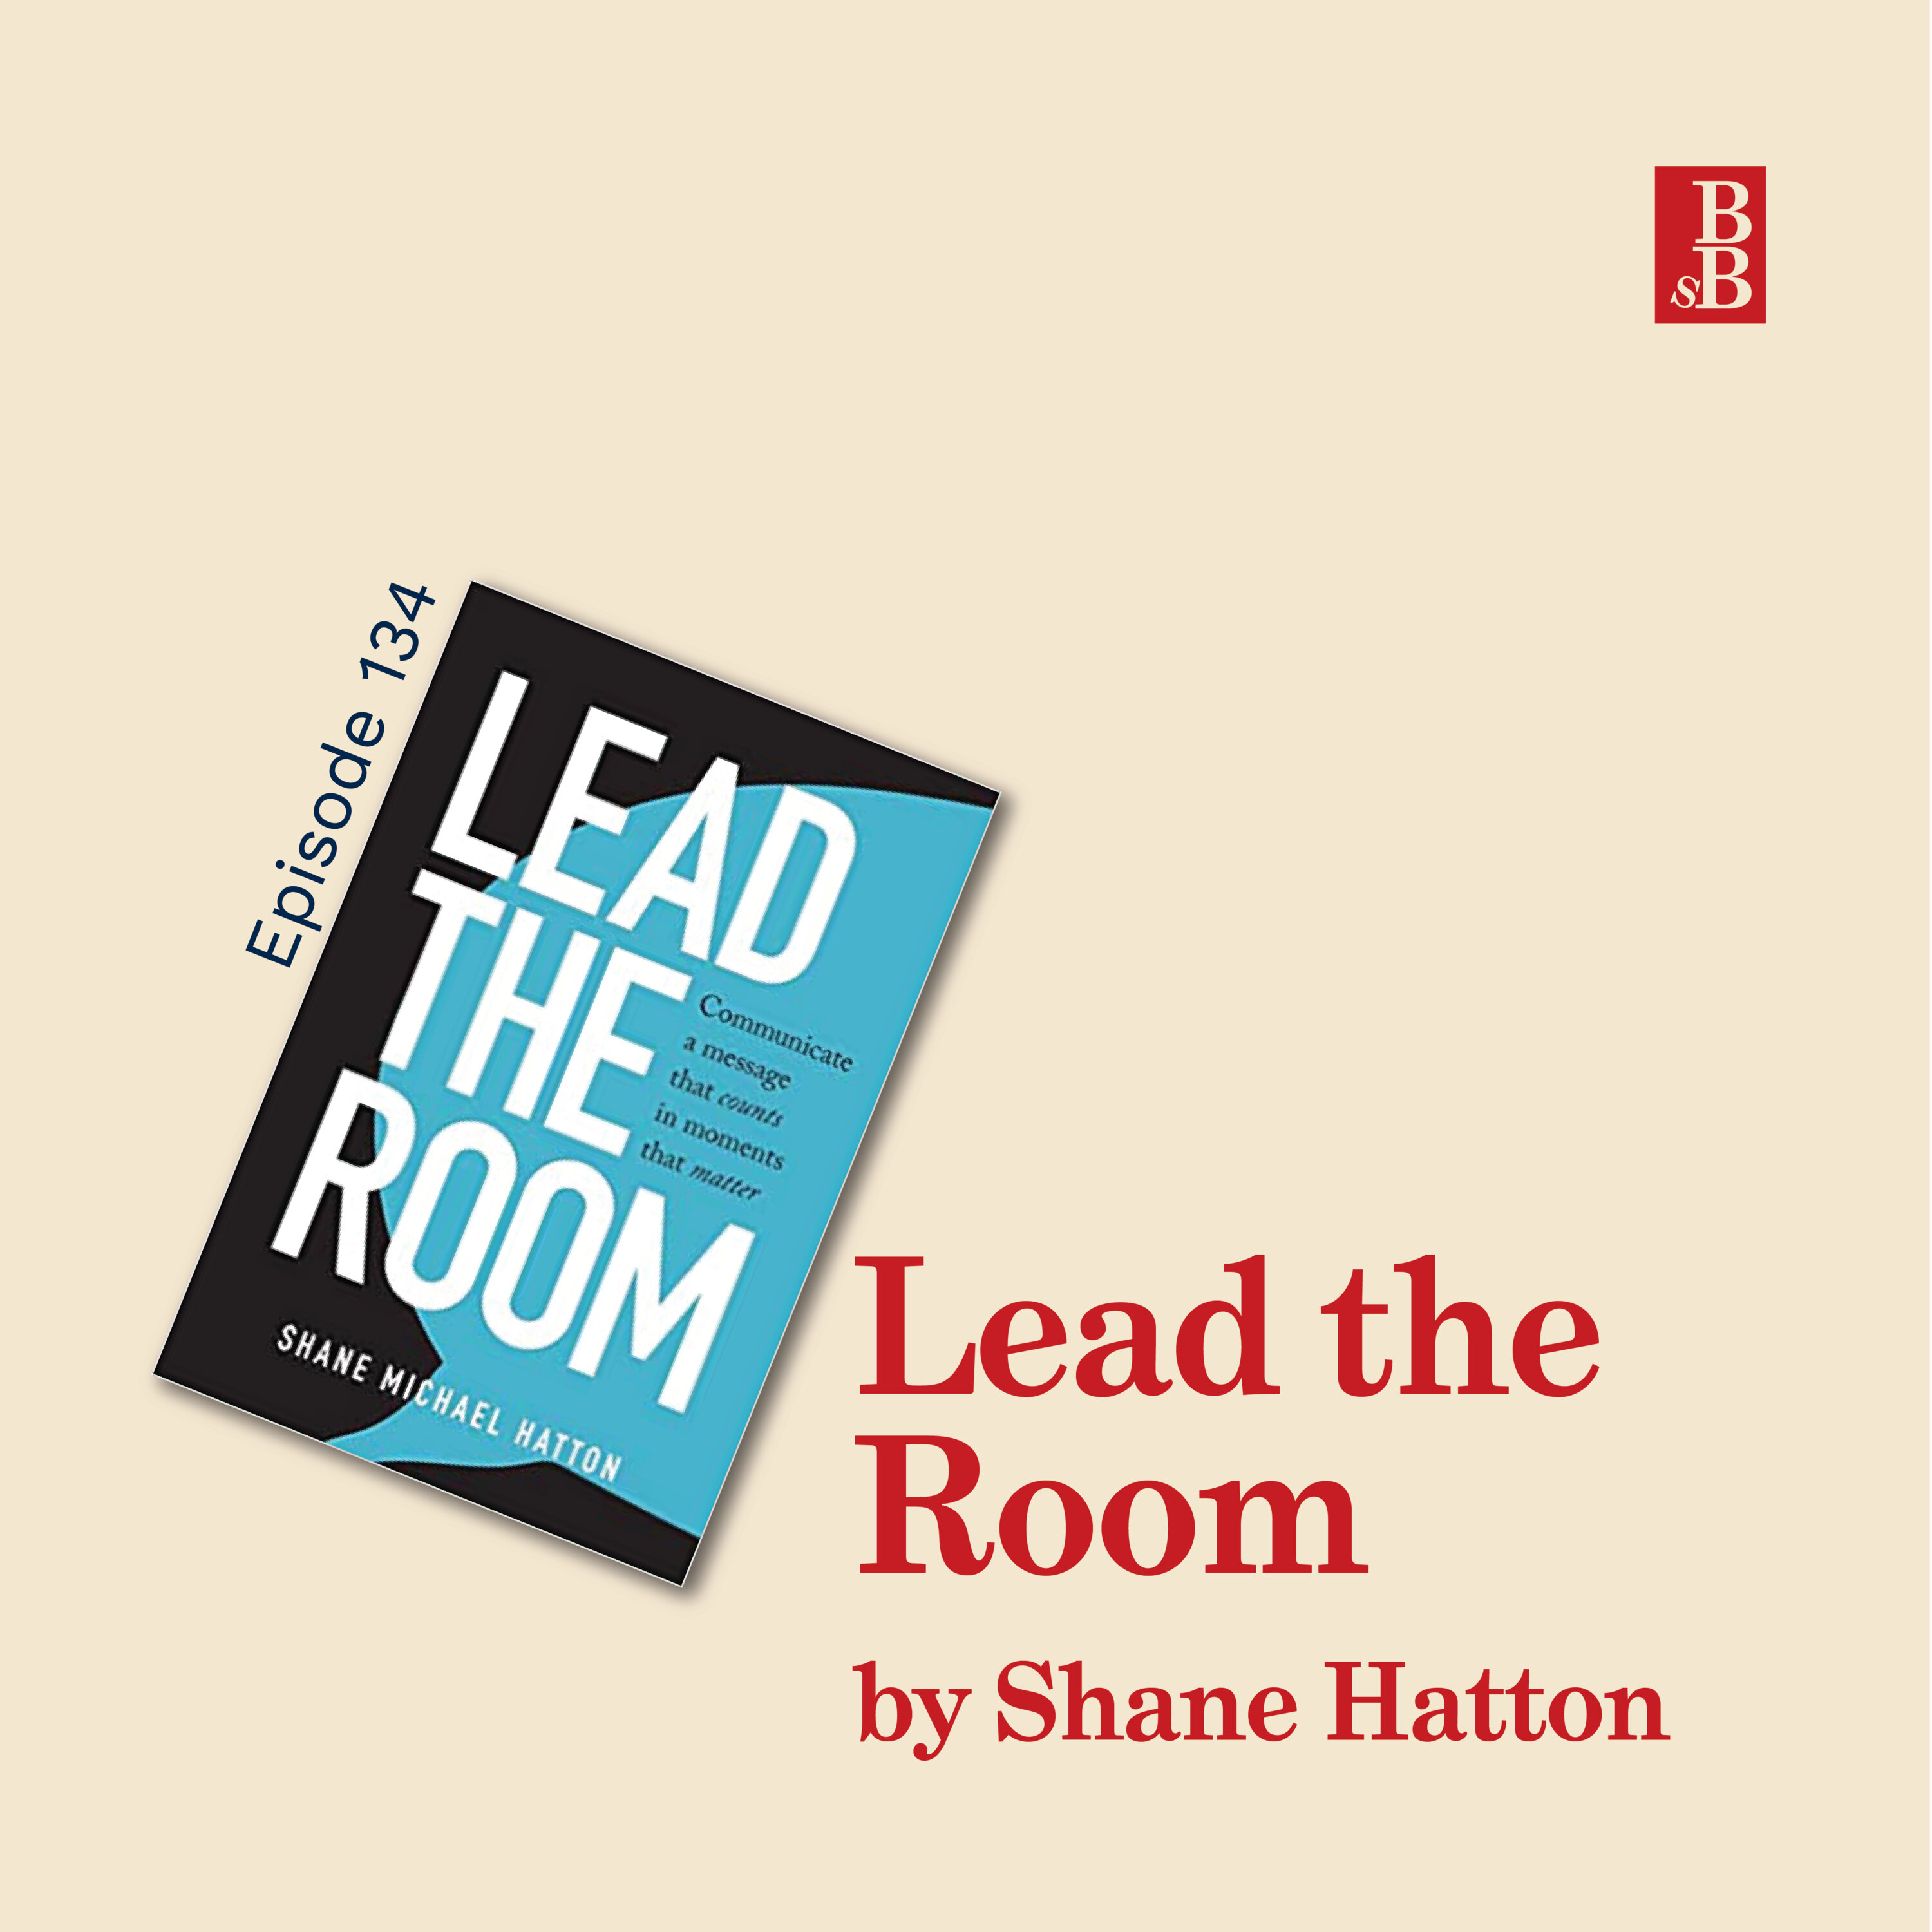 Lead the Room by Shane Hatton: the real secrets behind great presentation skills Image